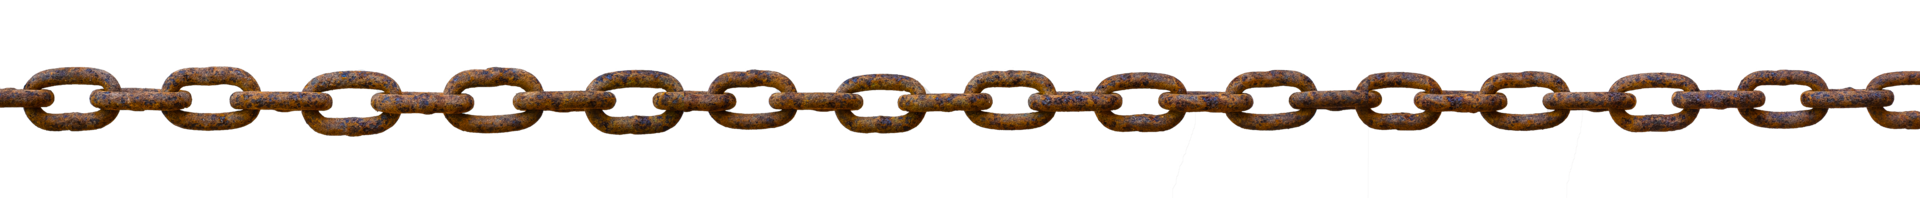 Old rusted metal chain Placed in a straight line png